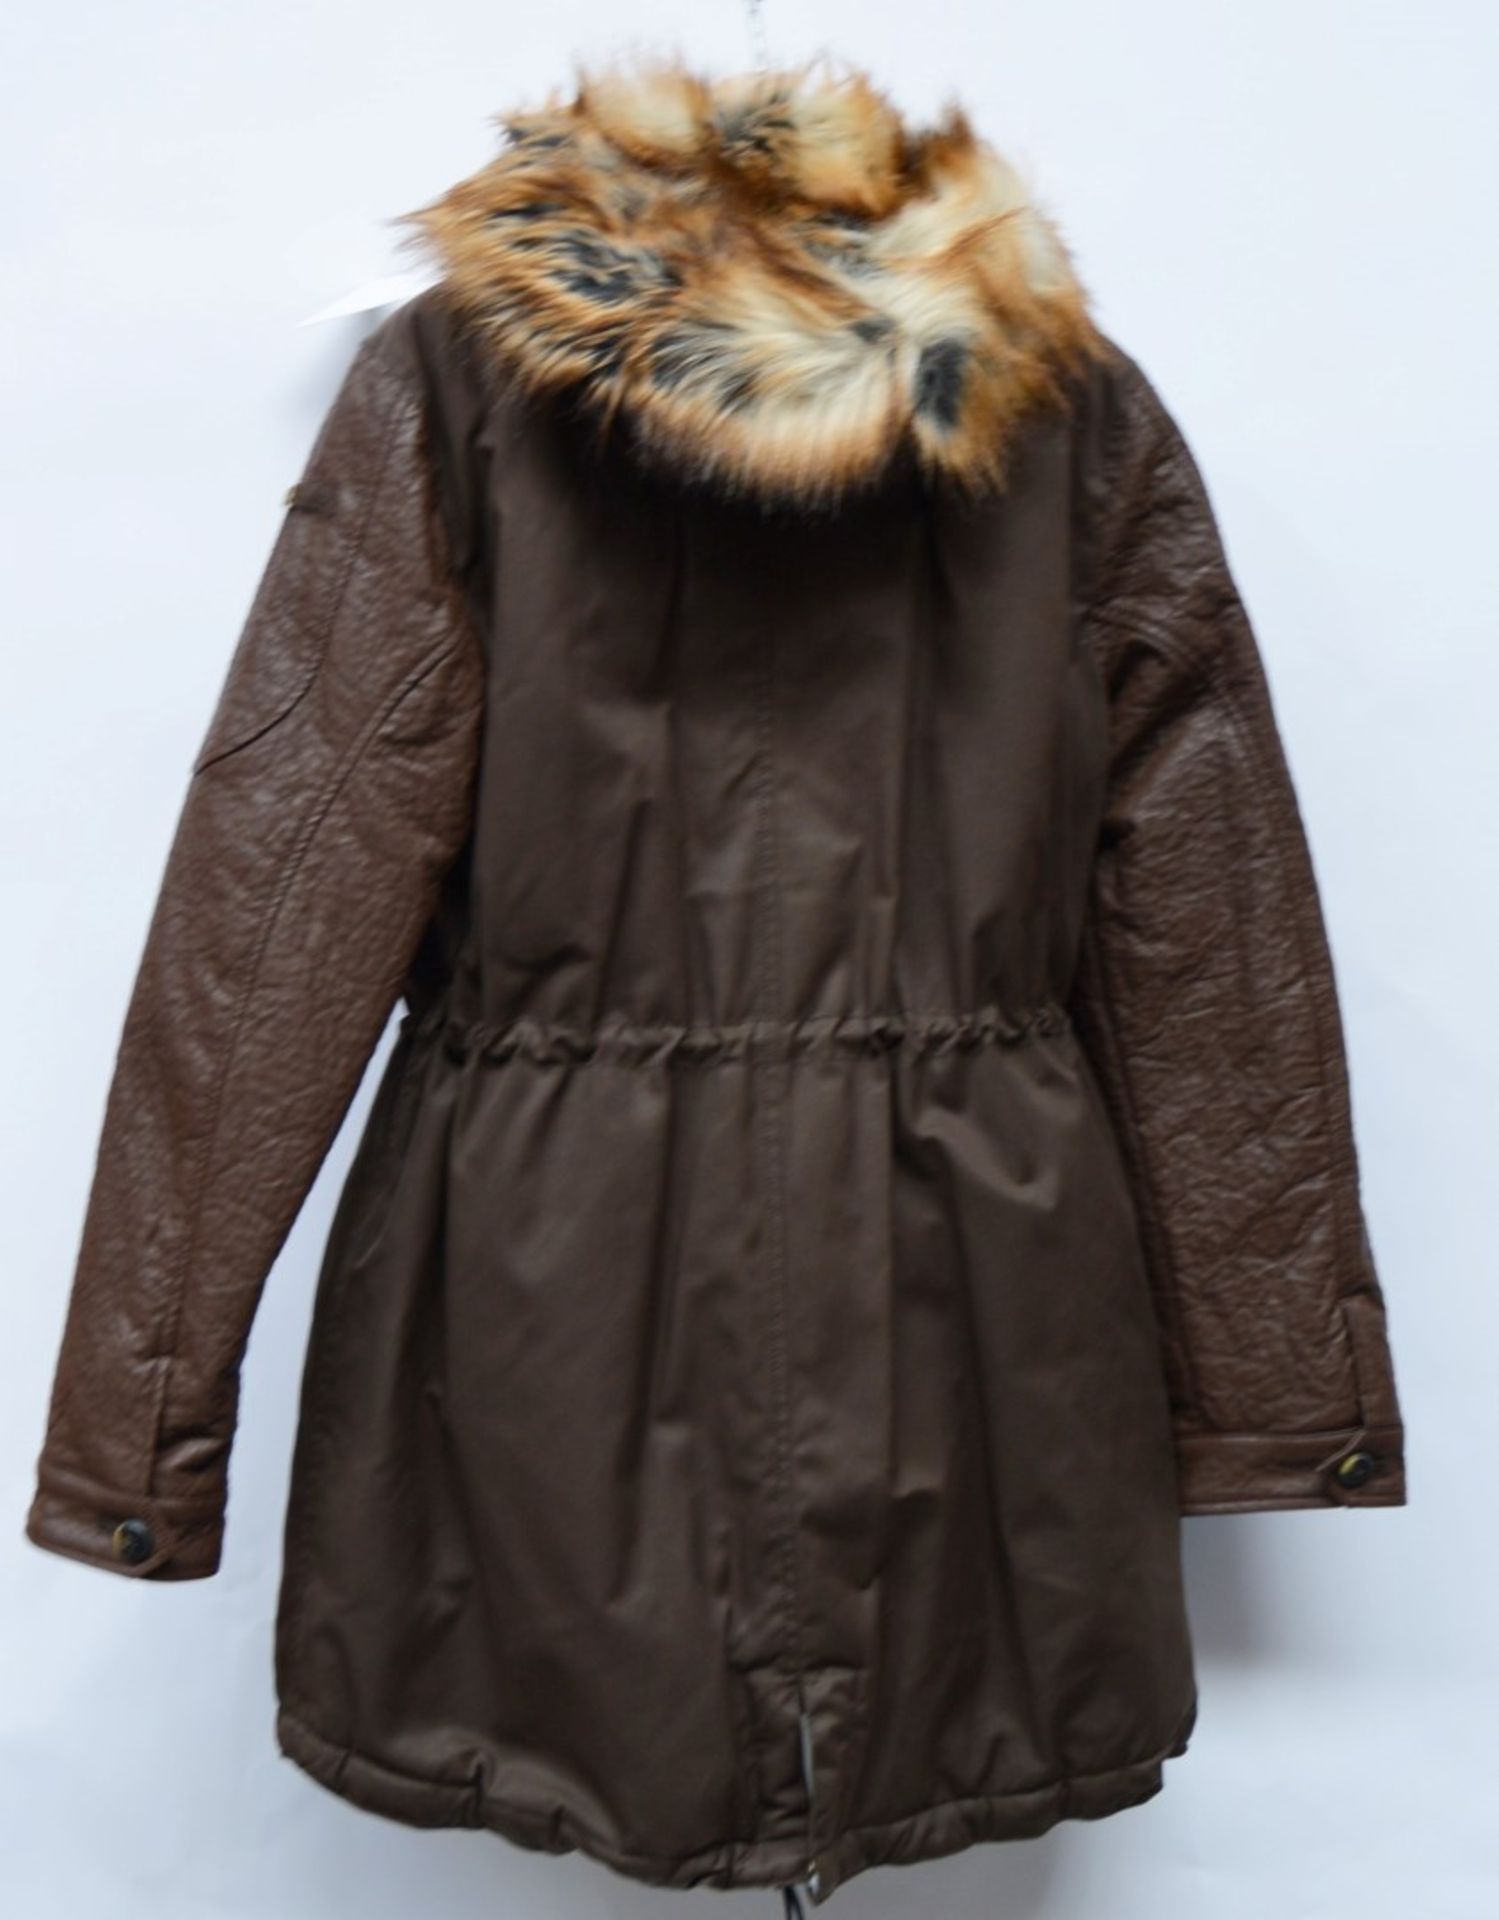 1 x Steilmann KSTN By Kirsten Womens Coat - Hard Wearing Coat With Faux Leather Detail, Drawstring - Image 2 of 20